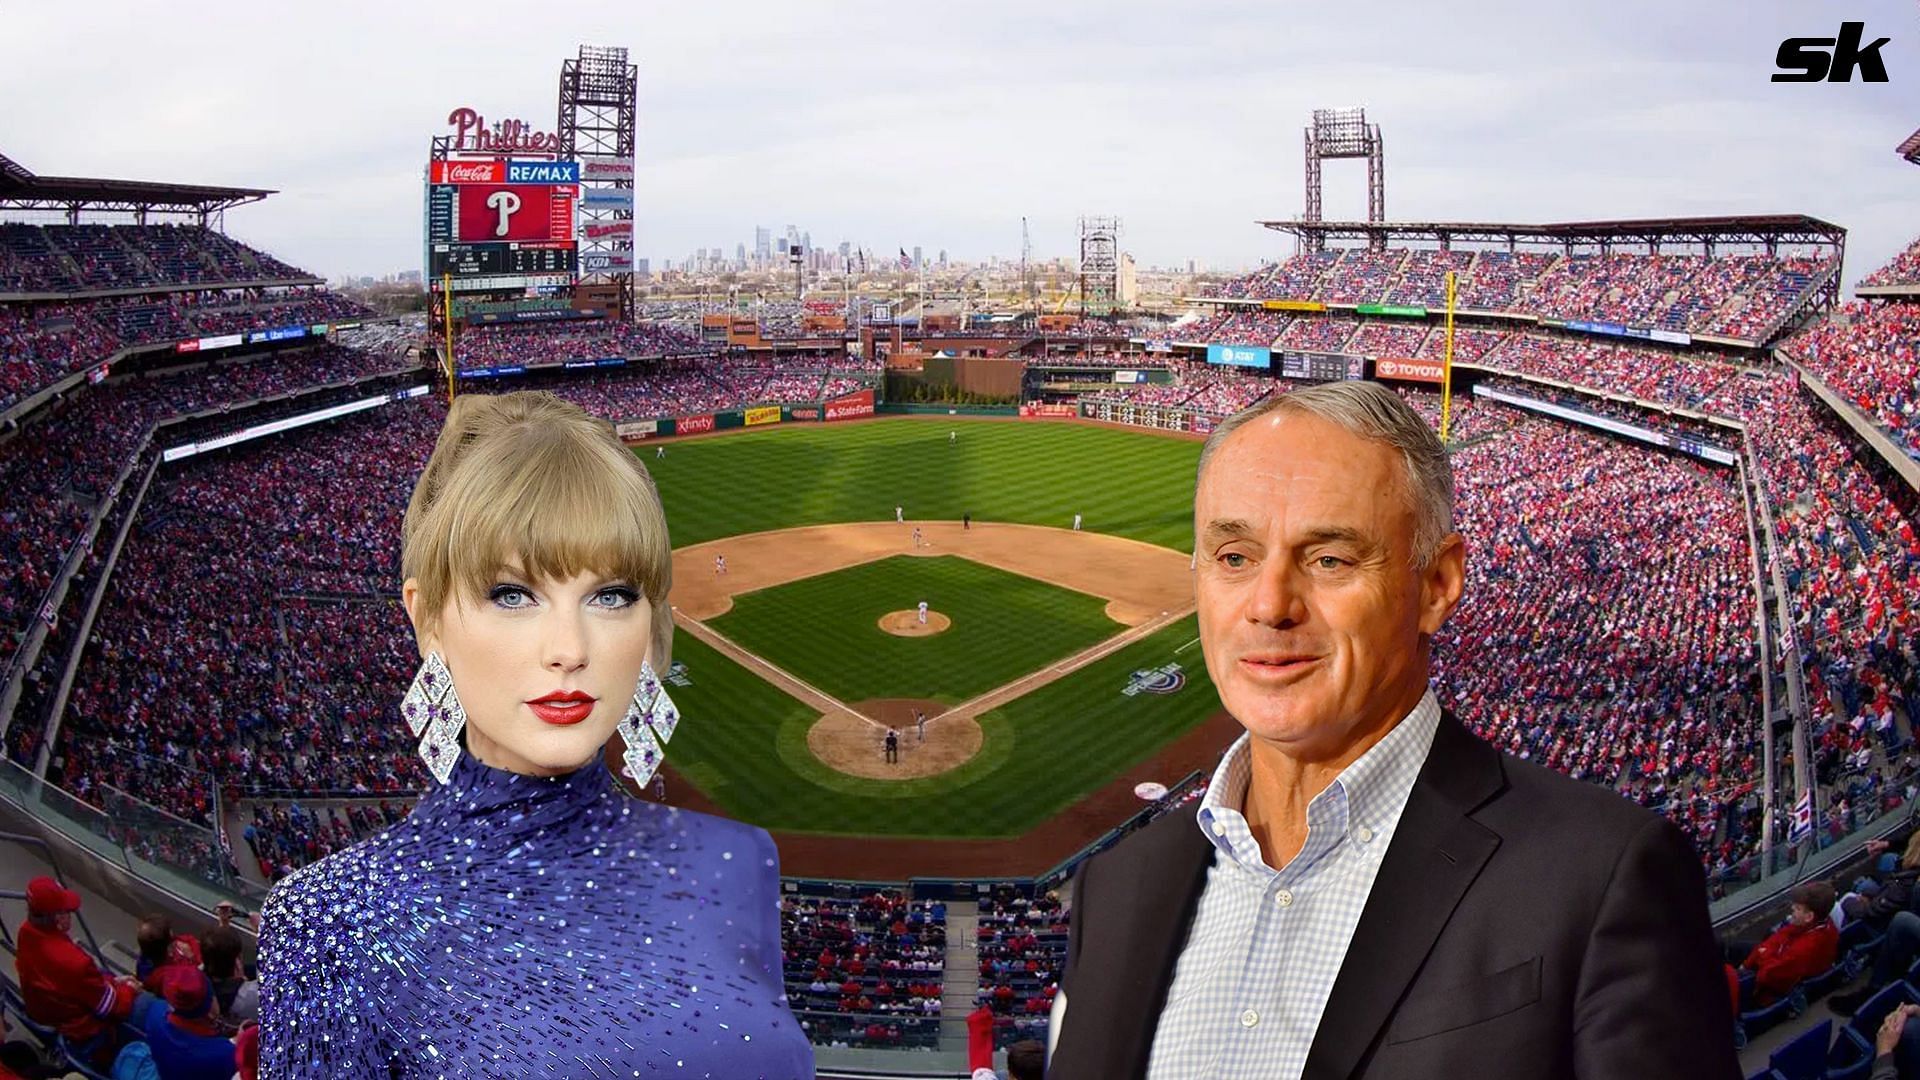 Should Taylor Swift come to the World Series?